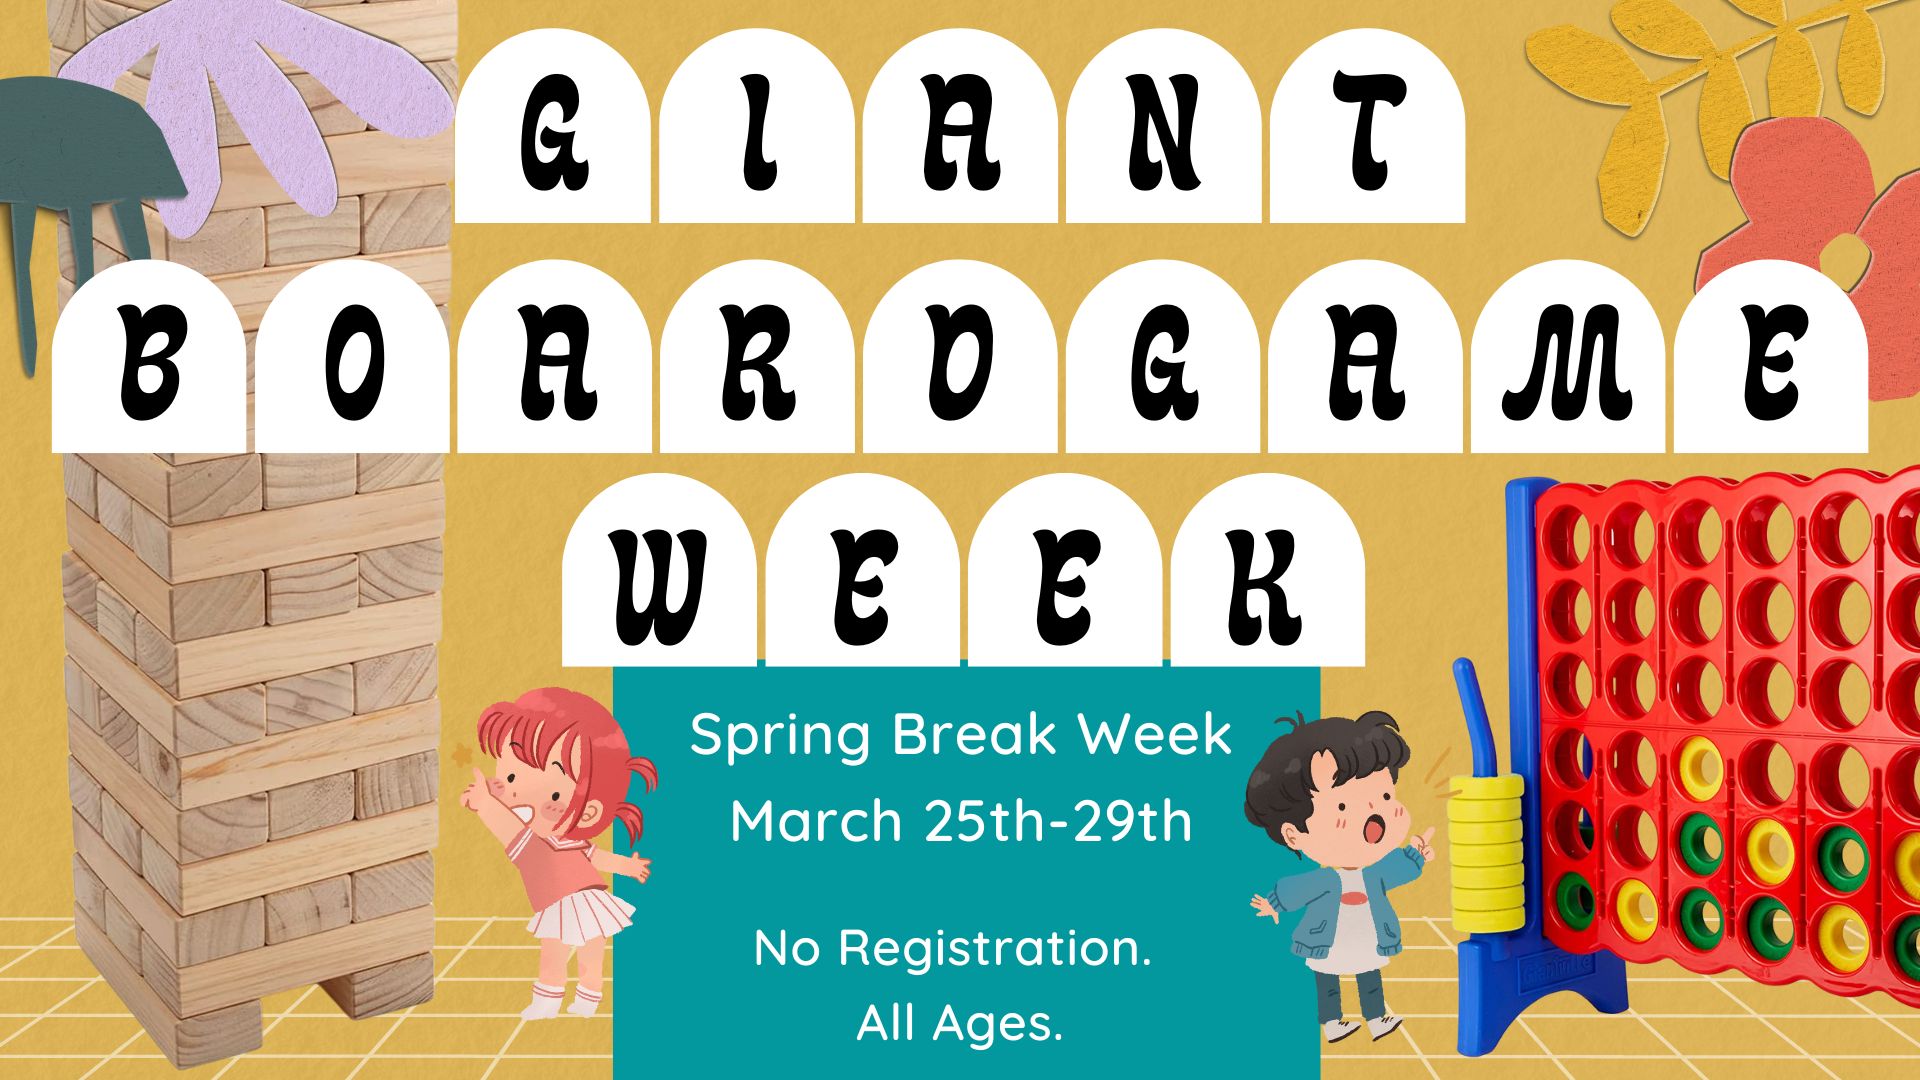 Image of Two children, one pointing to a giant Jenga game, and the other pointing to a giant Connect  4 game.   Text reads:  Giant Board Game Spring Break Week. Drop in any time.  March 25 thru 29 to play supersized games! All ages.